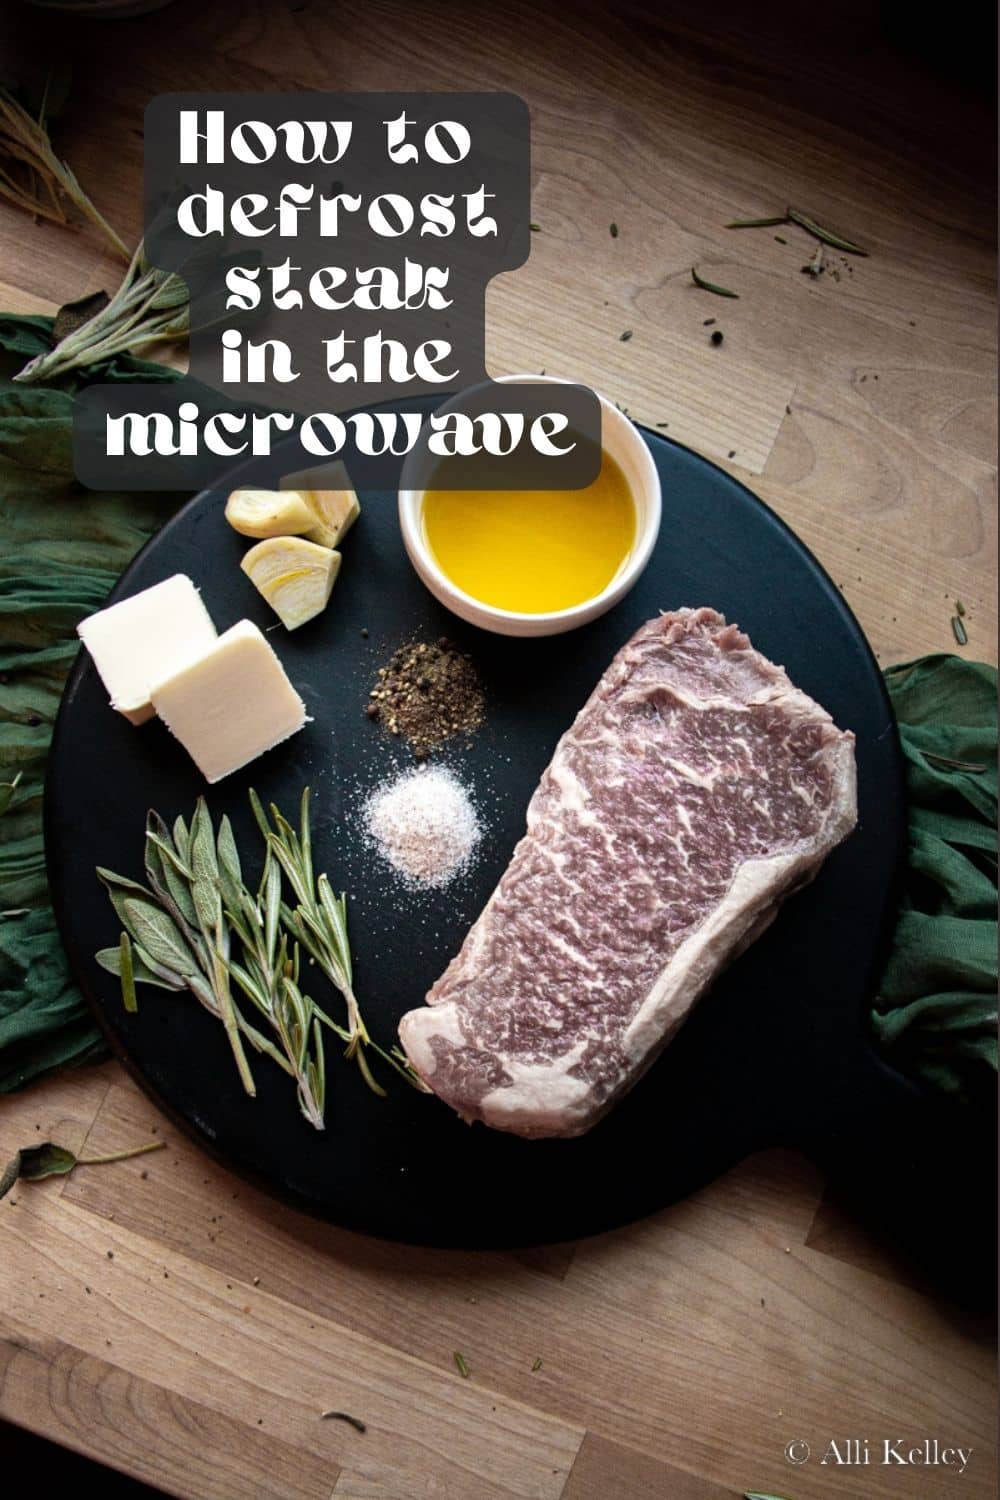 There's nothing more disappointing than taking out a steak for dinner only to realize you forgot to thaw it out. But don't worry; there's an easy way to thaw steak! Using a microwave is the most convenient and fastest way to defrost your steak - without compromising food safety.